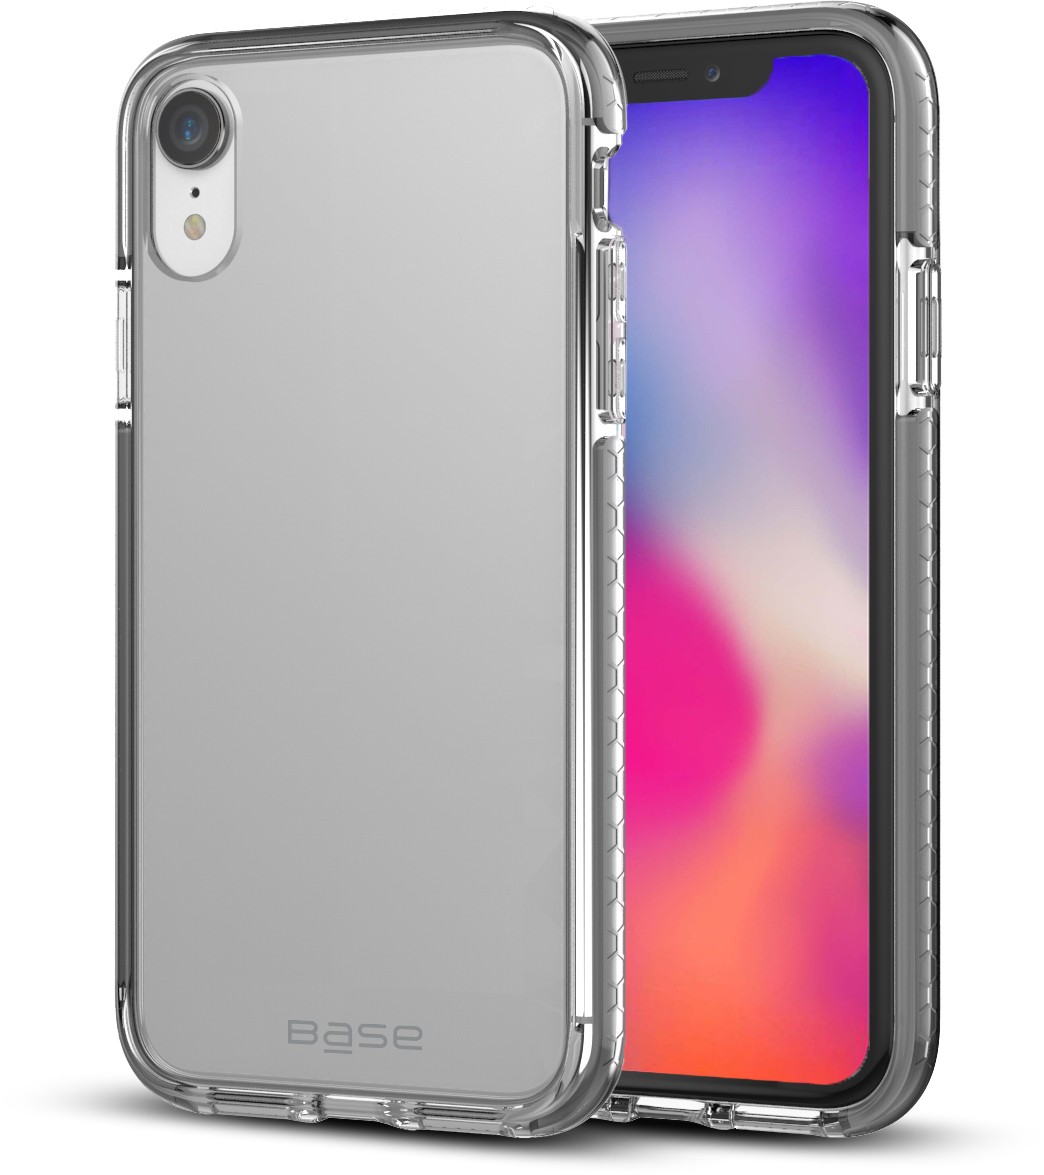 Base BORDERLINE - Dual Border Impact protection For iPhone XR - BLACK